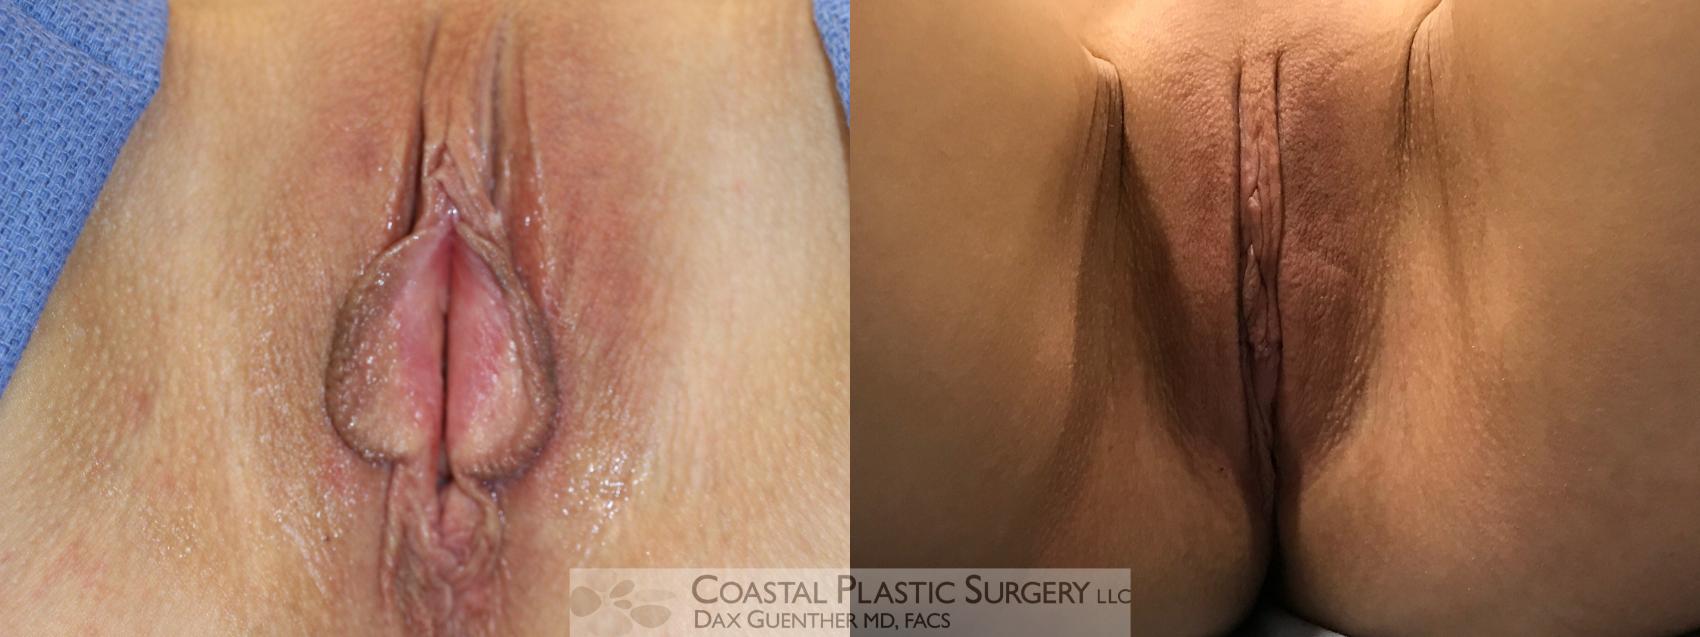 Before & After Labiaplasty Case 114 Supine View in Hingham, MA